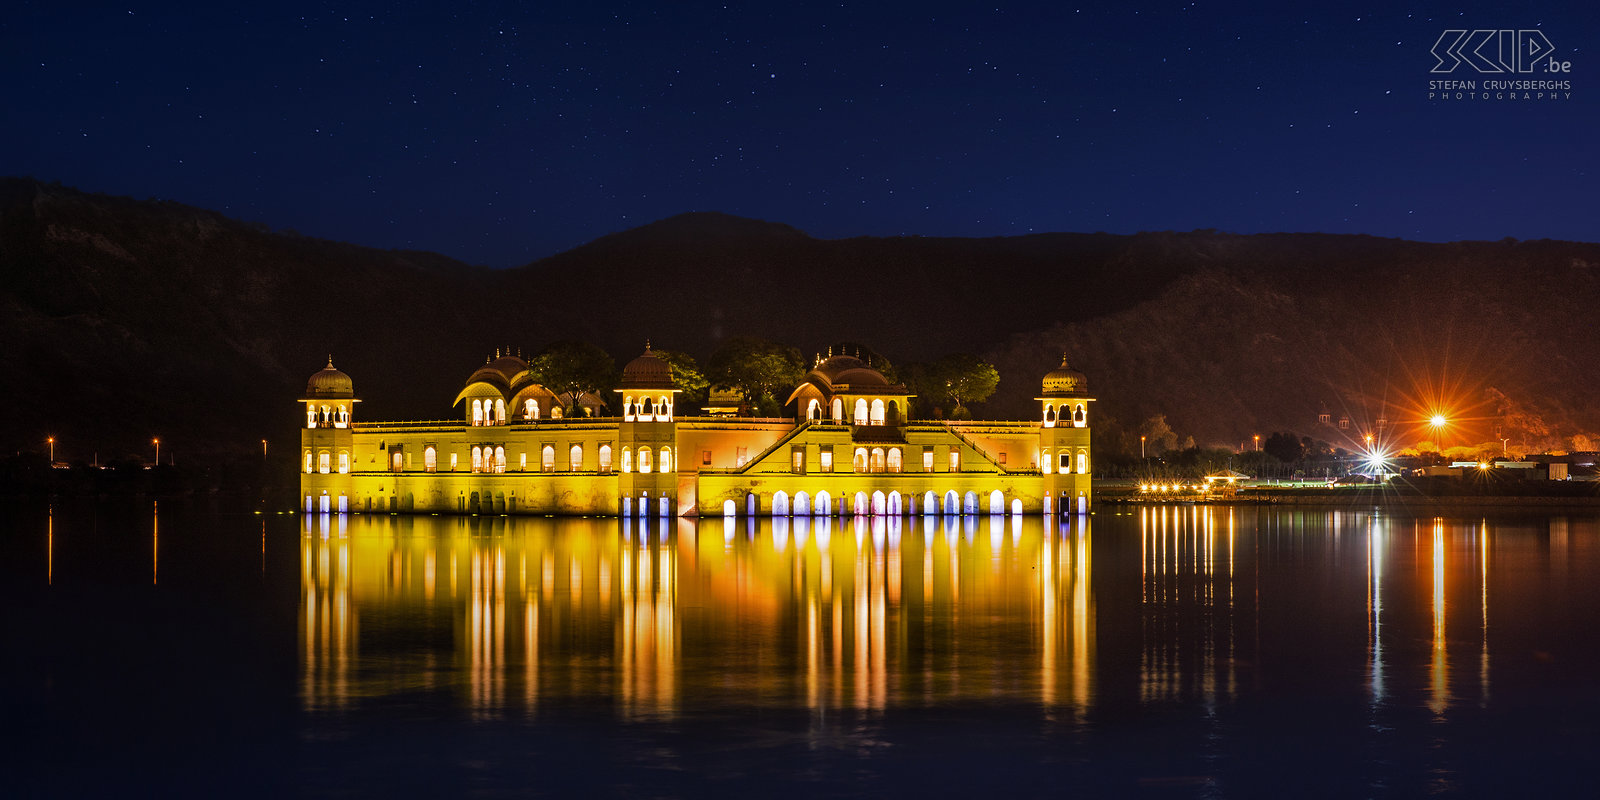 Jaipur - Jal Mahal The Jal Mahal (meaning 'Water Palace') is a palace from the 18th century which is located in the middle of the Man Sagar Lake in Jaipur. It lights up beautifully in the evening and gives a great reflection in the water. Stefan Cruysberghs